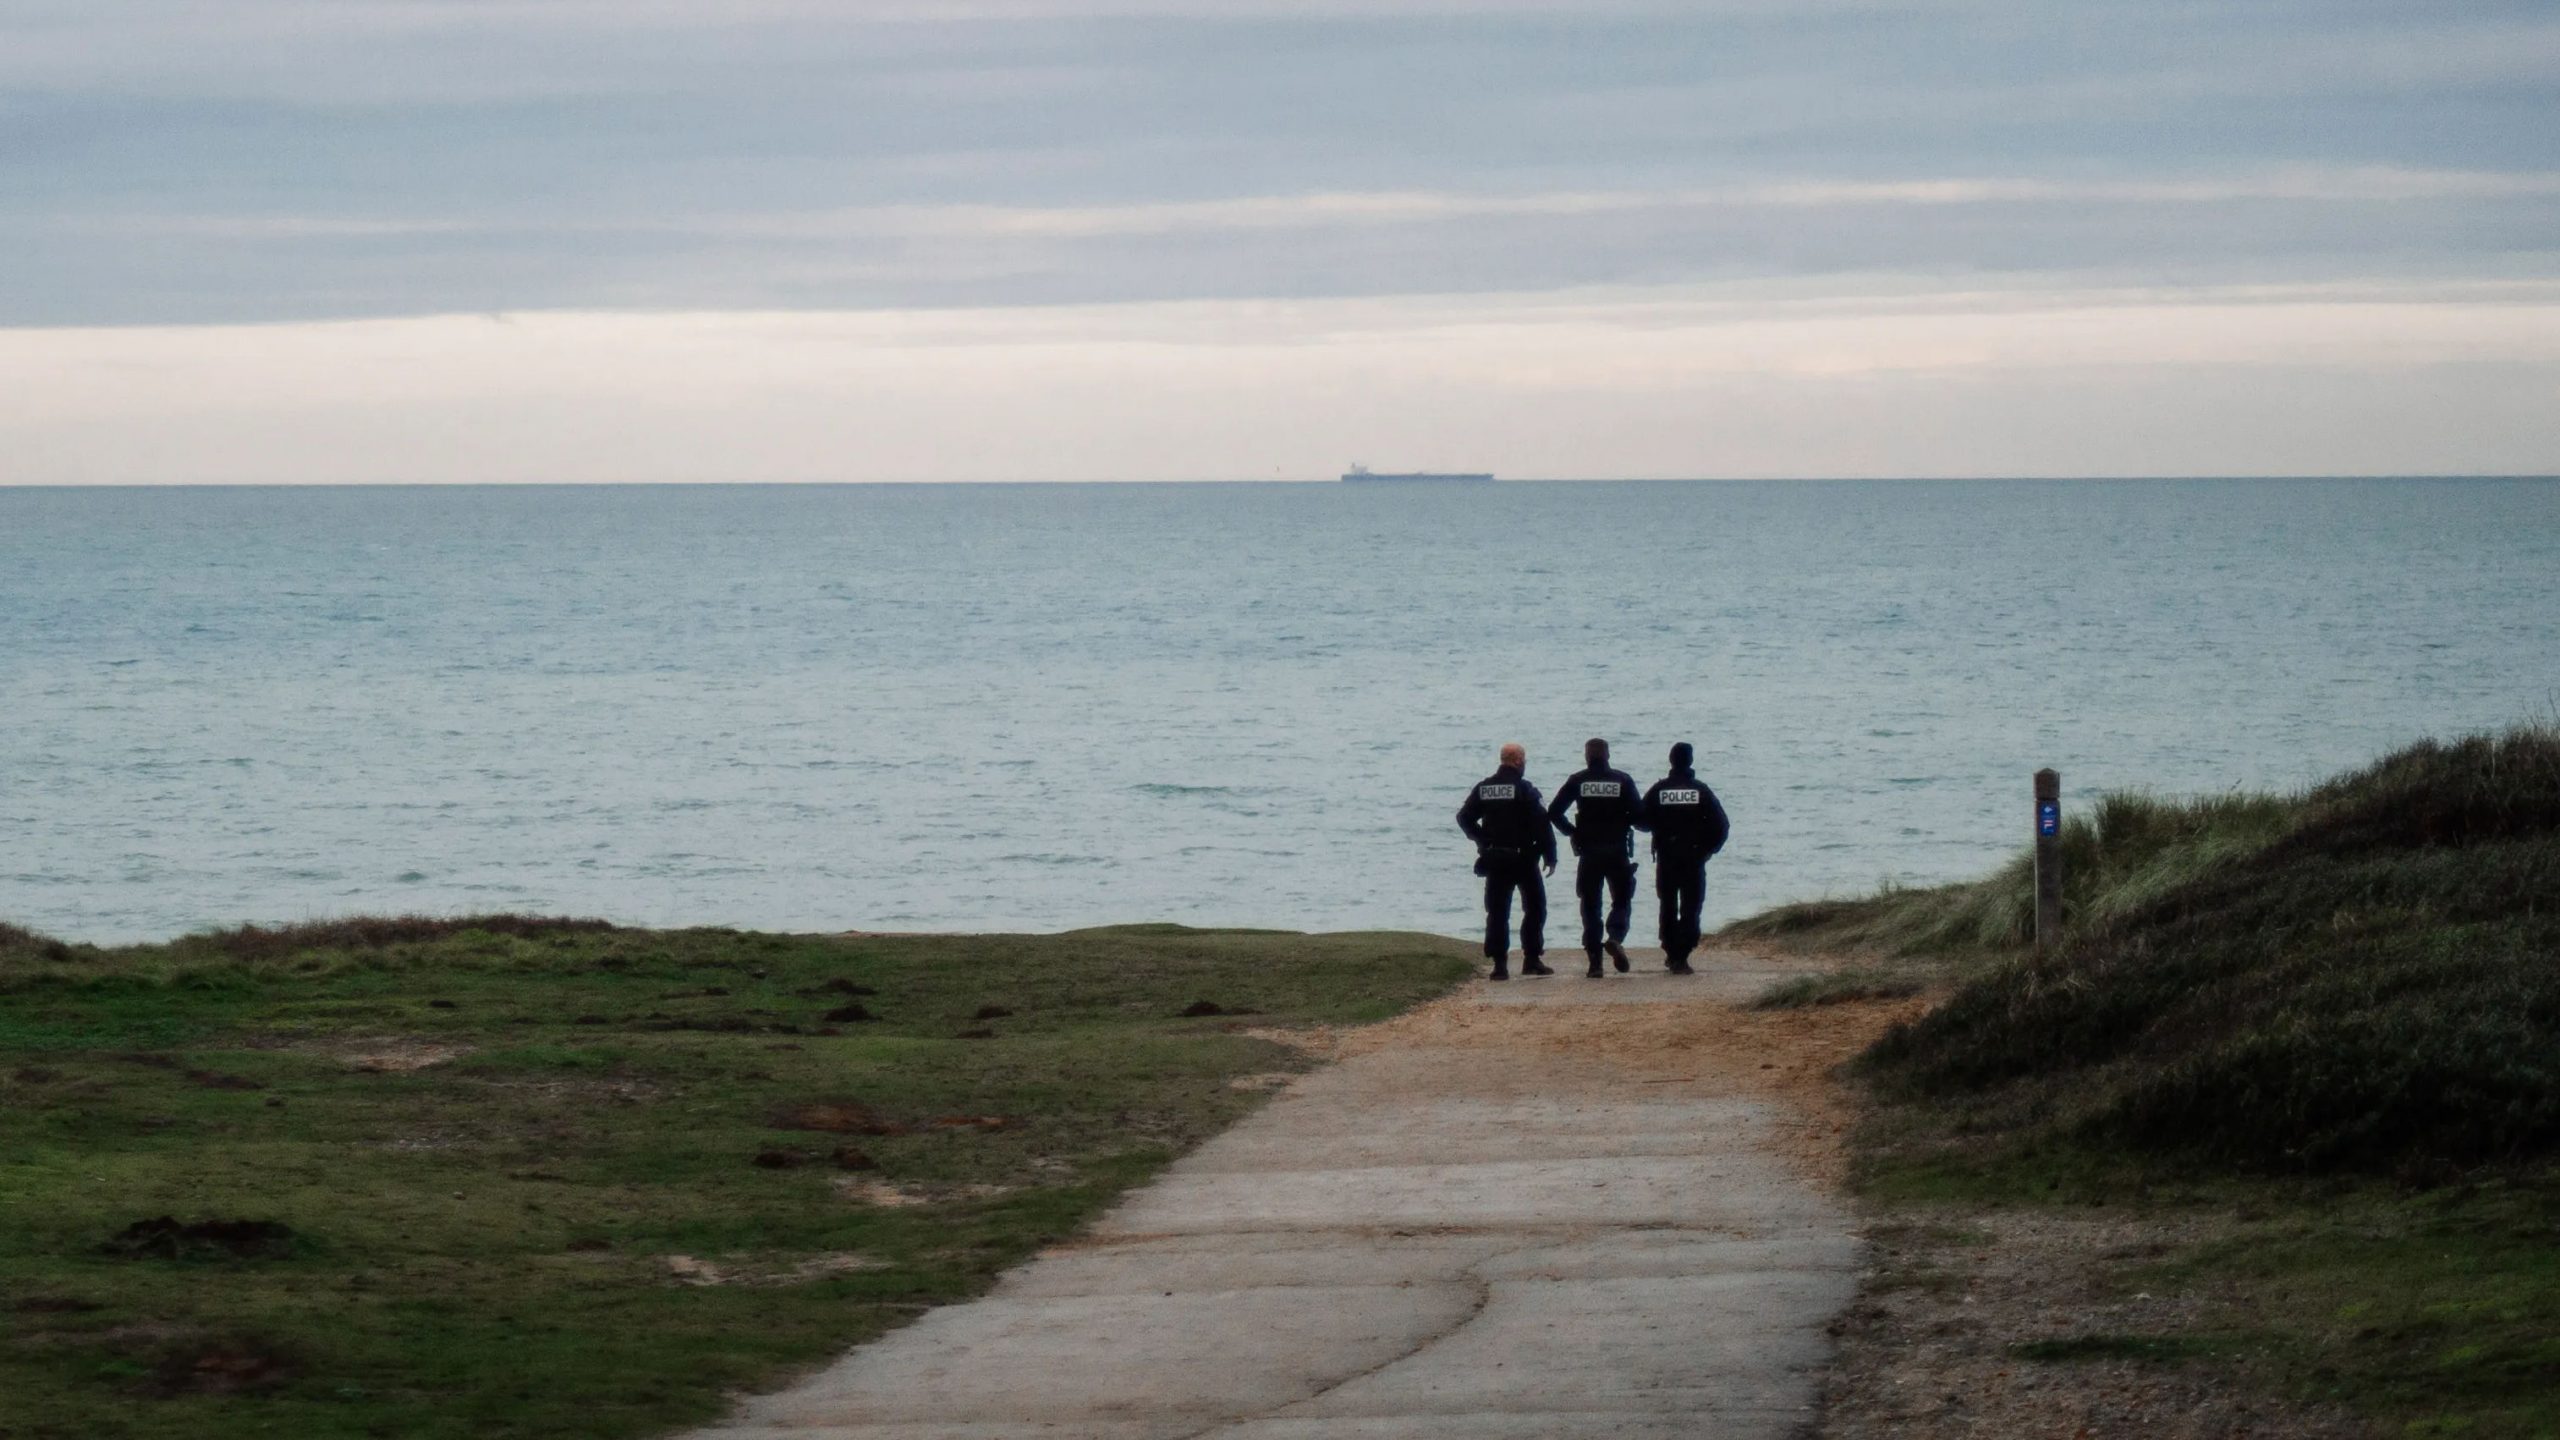 France, Britain trade blame after 27 migrants drown in English Channel